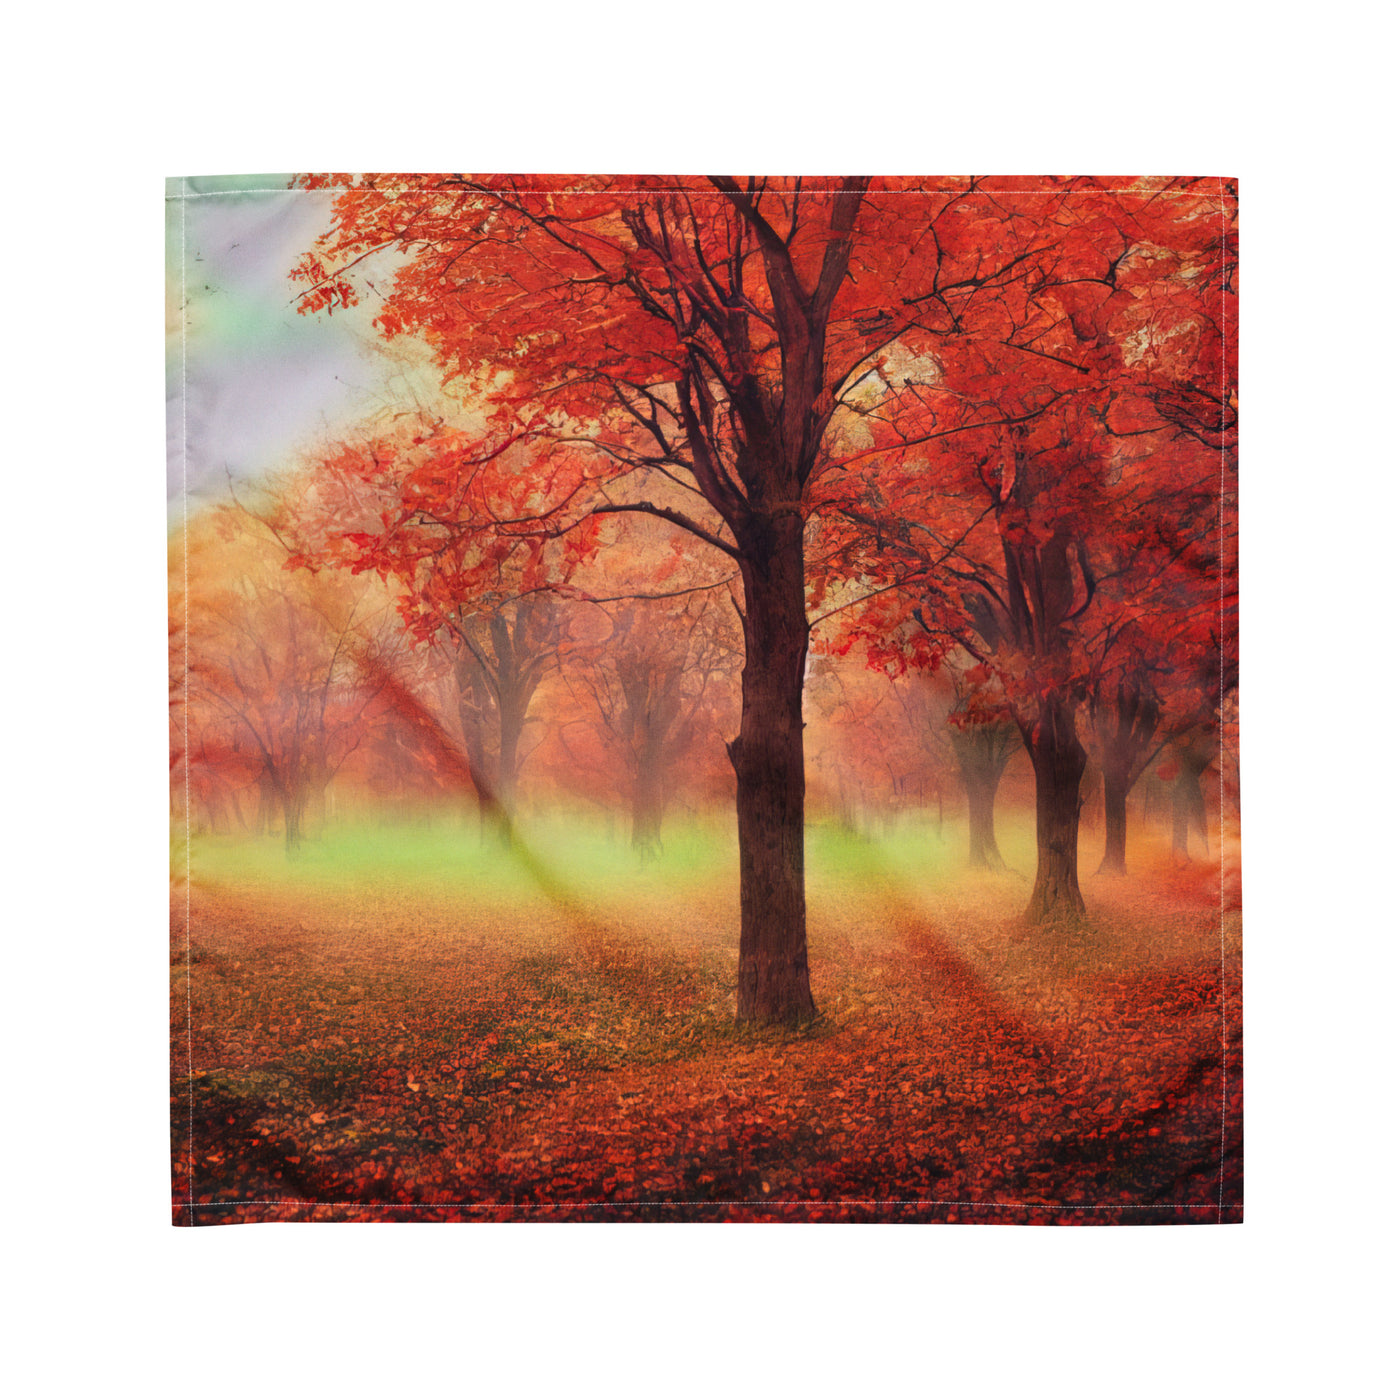 Wald im Herbst - Rote Herbstblätter - Bandana (All-Over Print) camping xxx M